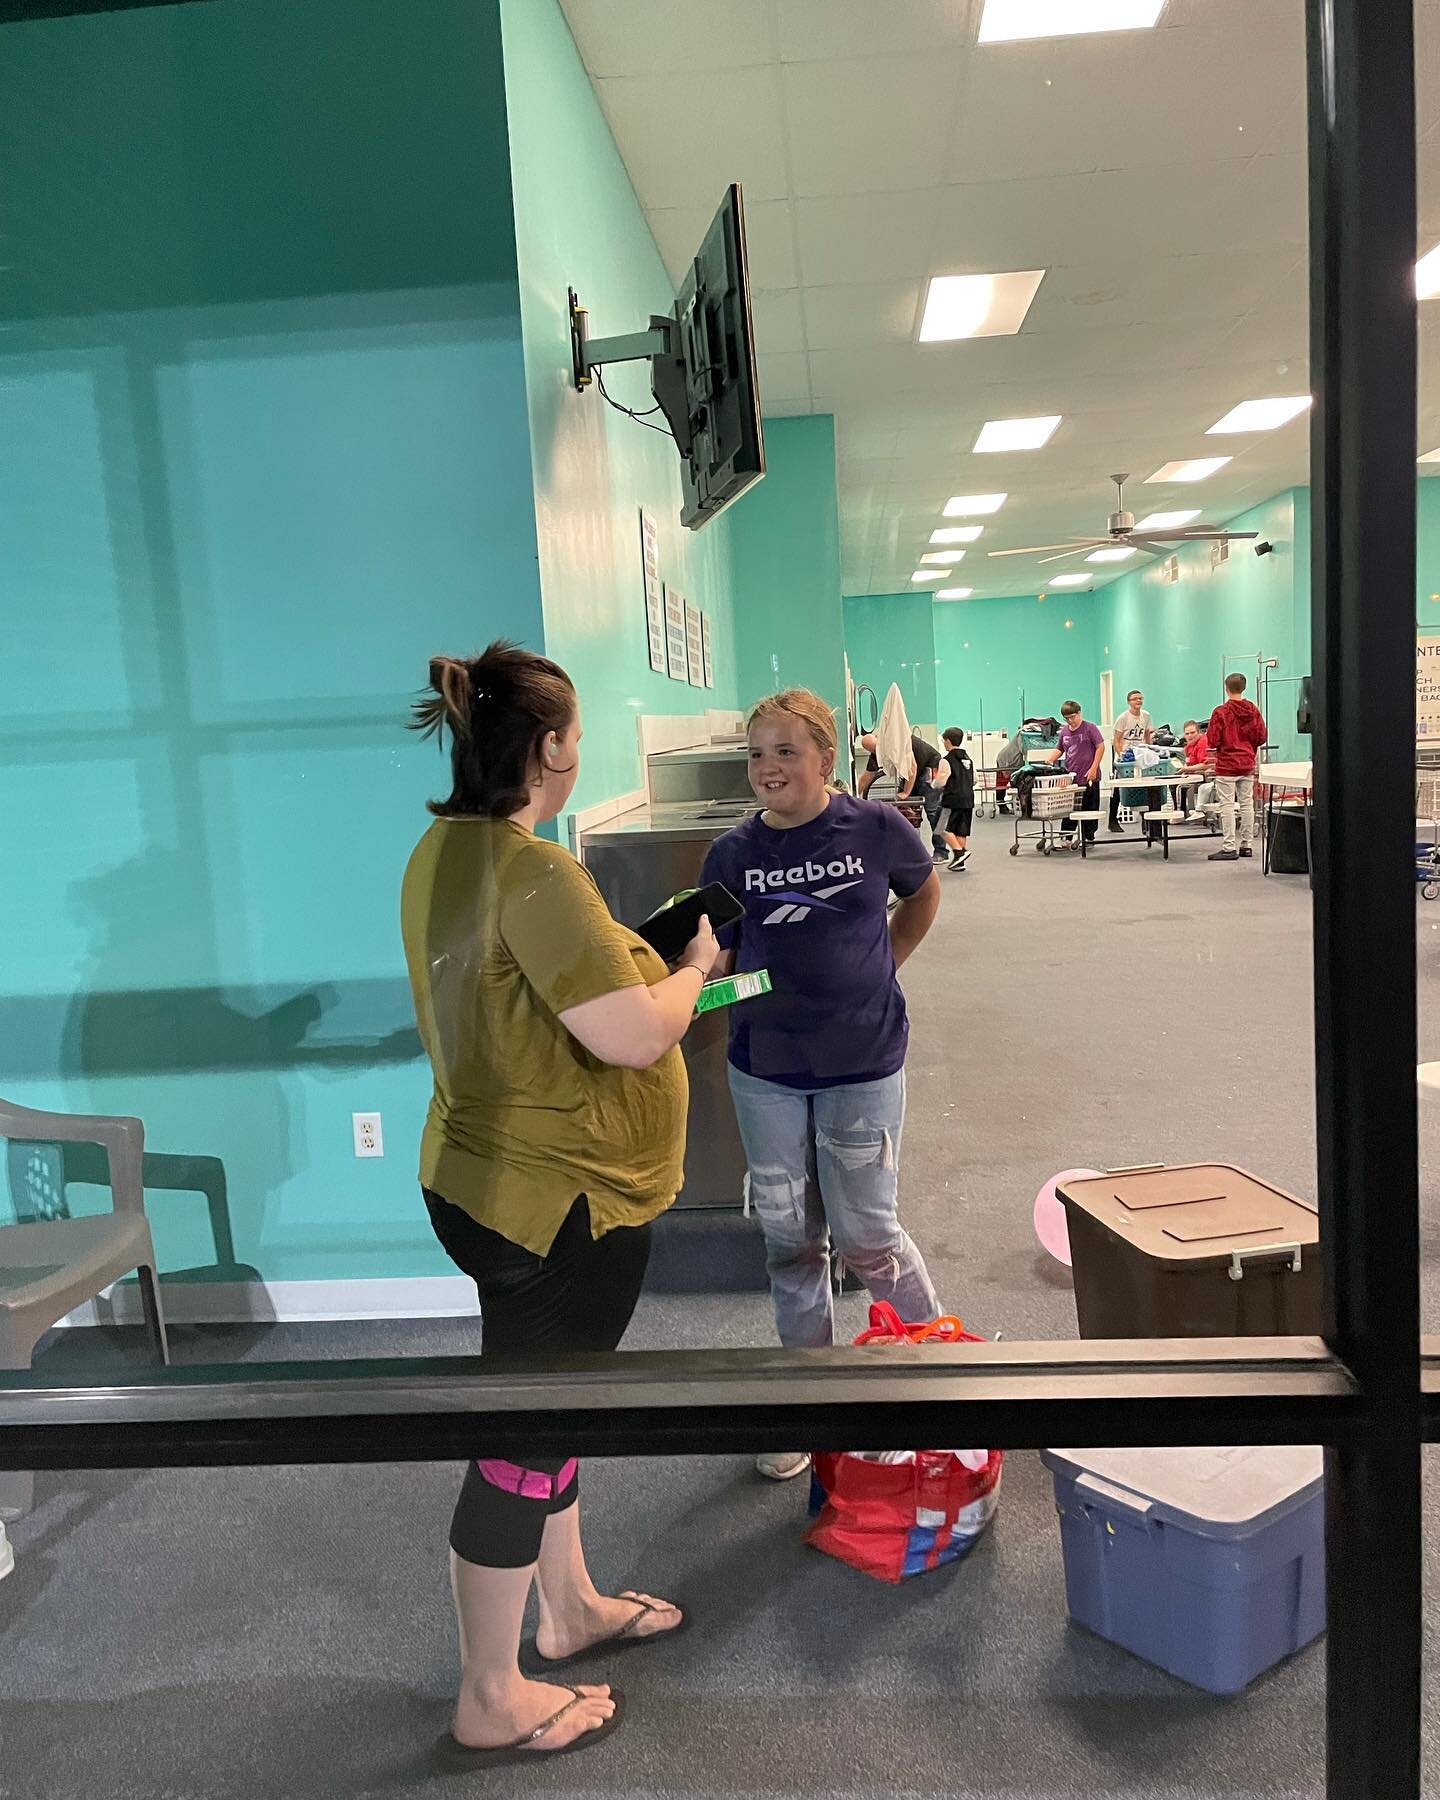 Last Sunday was Random Acts of Kindness at FLF Groups. Alli shared with a lady that she was EXTRA special and brought tears to her eyes! #FLFStudentGroups